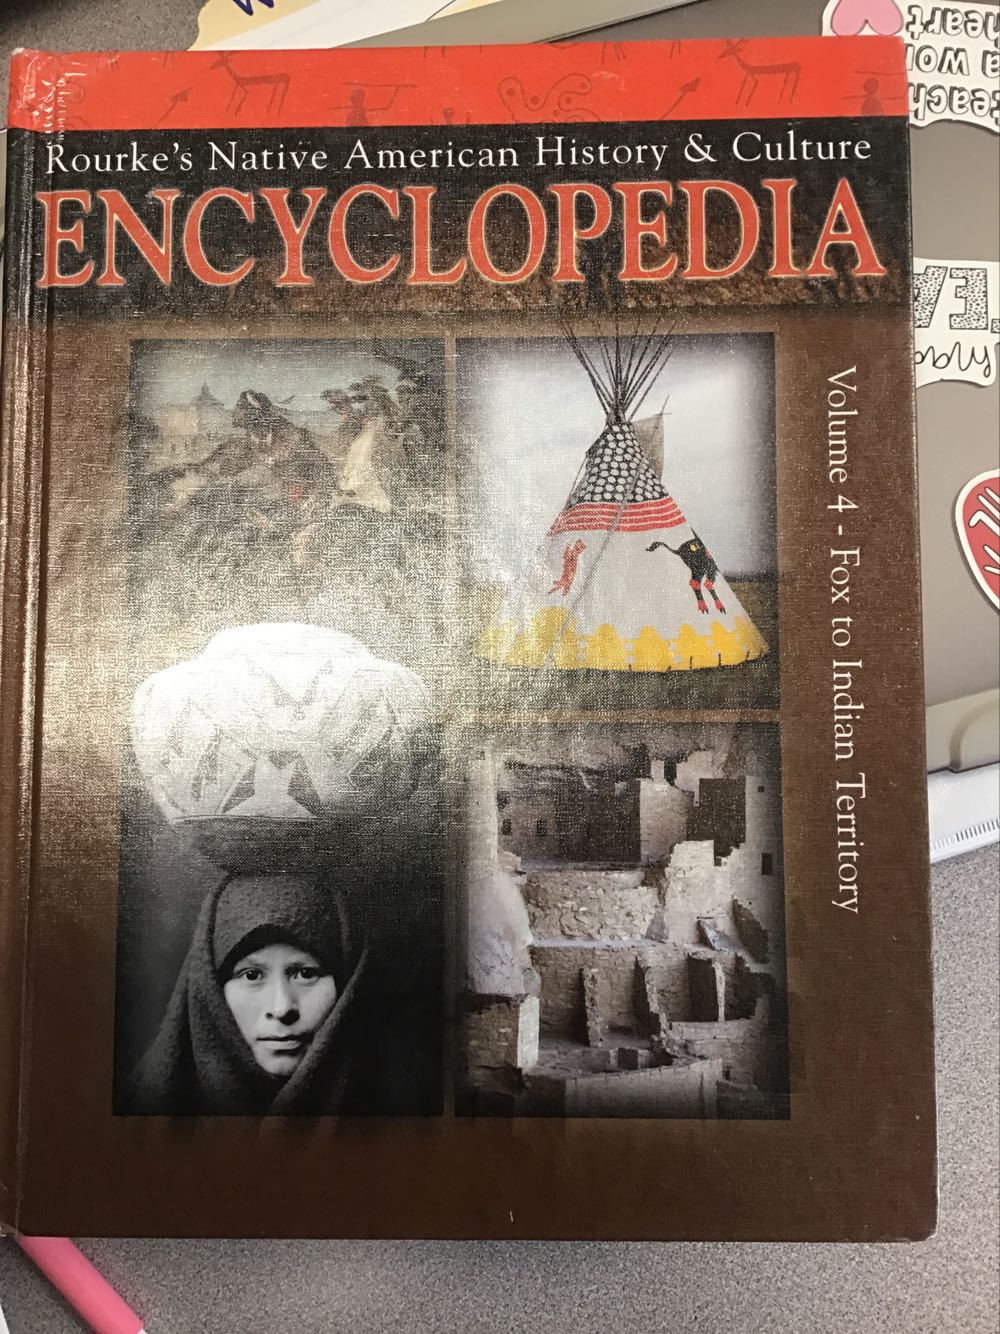 Rourke’s Native American History & Culture Encyclopedia - Julie Lundgren book collectible [Barcode 9781604729283] - Main Image 1